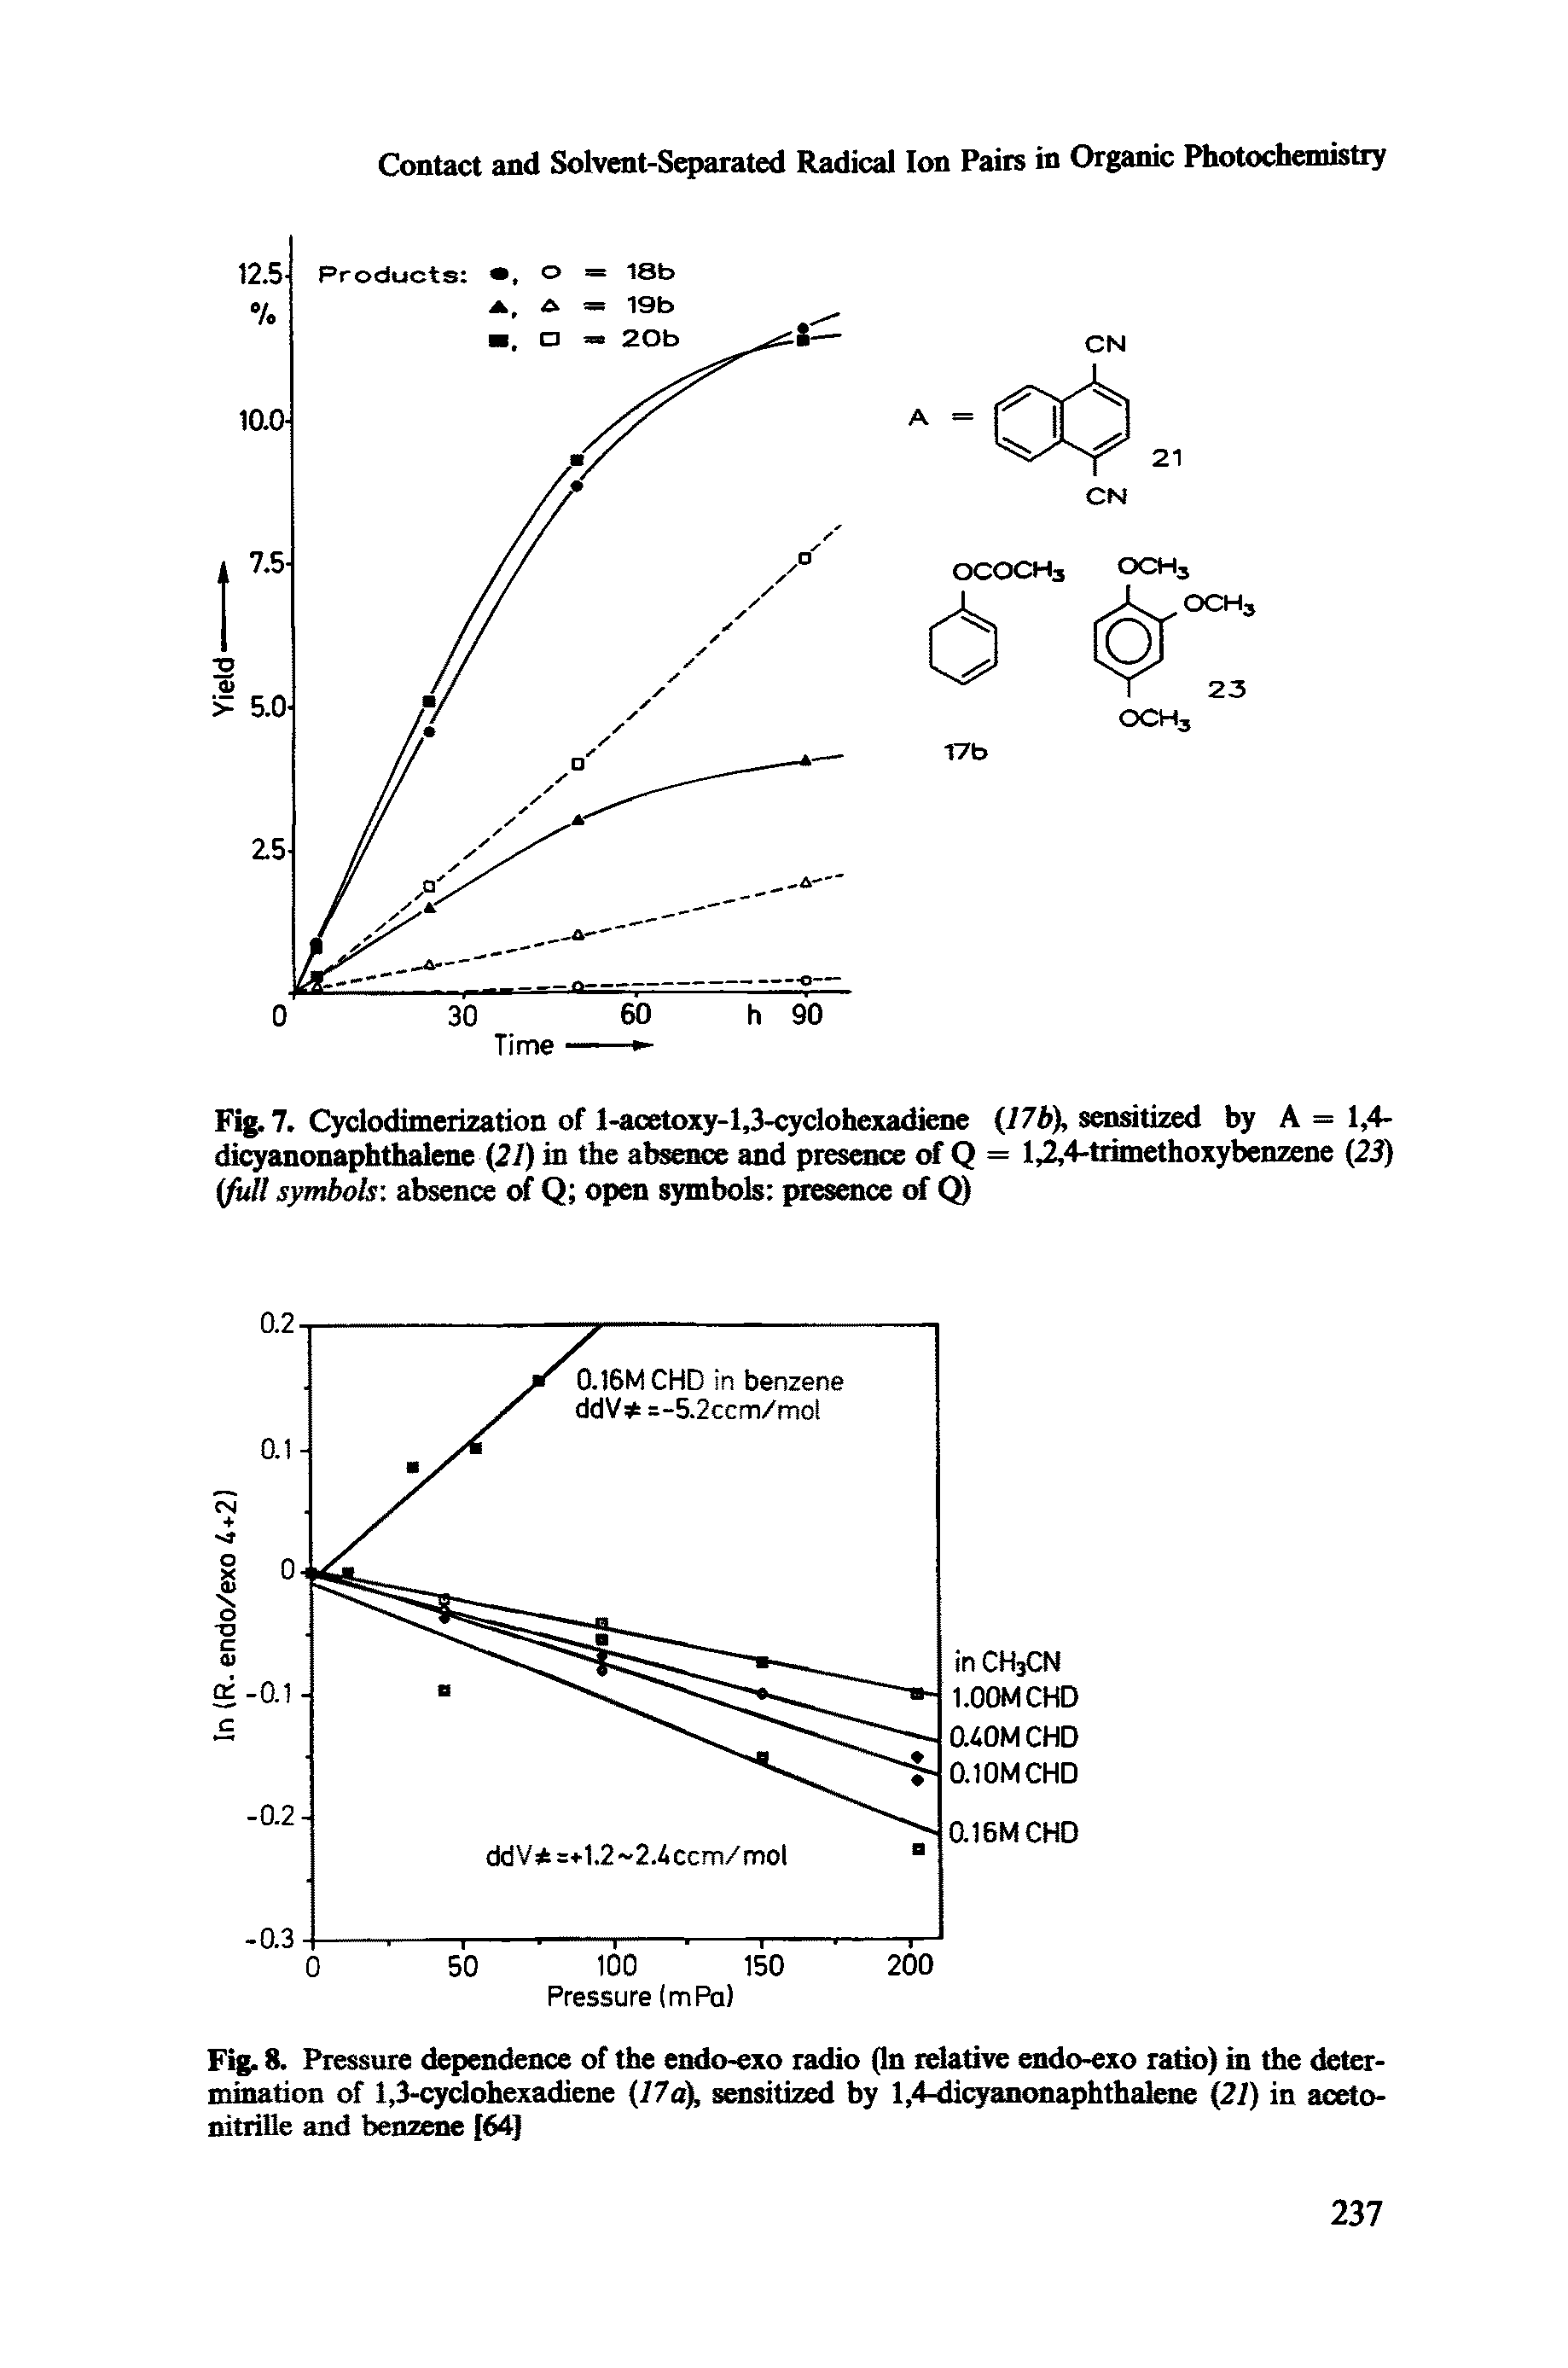 Fig. 8. Pressure dependence of the endo-exo radio (In relative endo-exo ratio) in the determination of 1,3-cydohexadiene (17 a), sensitized by 1,4-dicyanonaphthalene (21) in aceto-nitrille and benzene [64]...